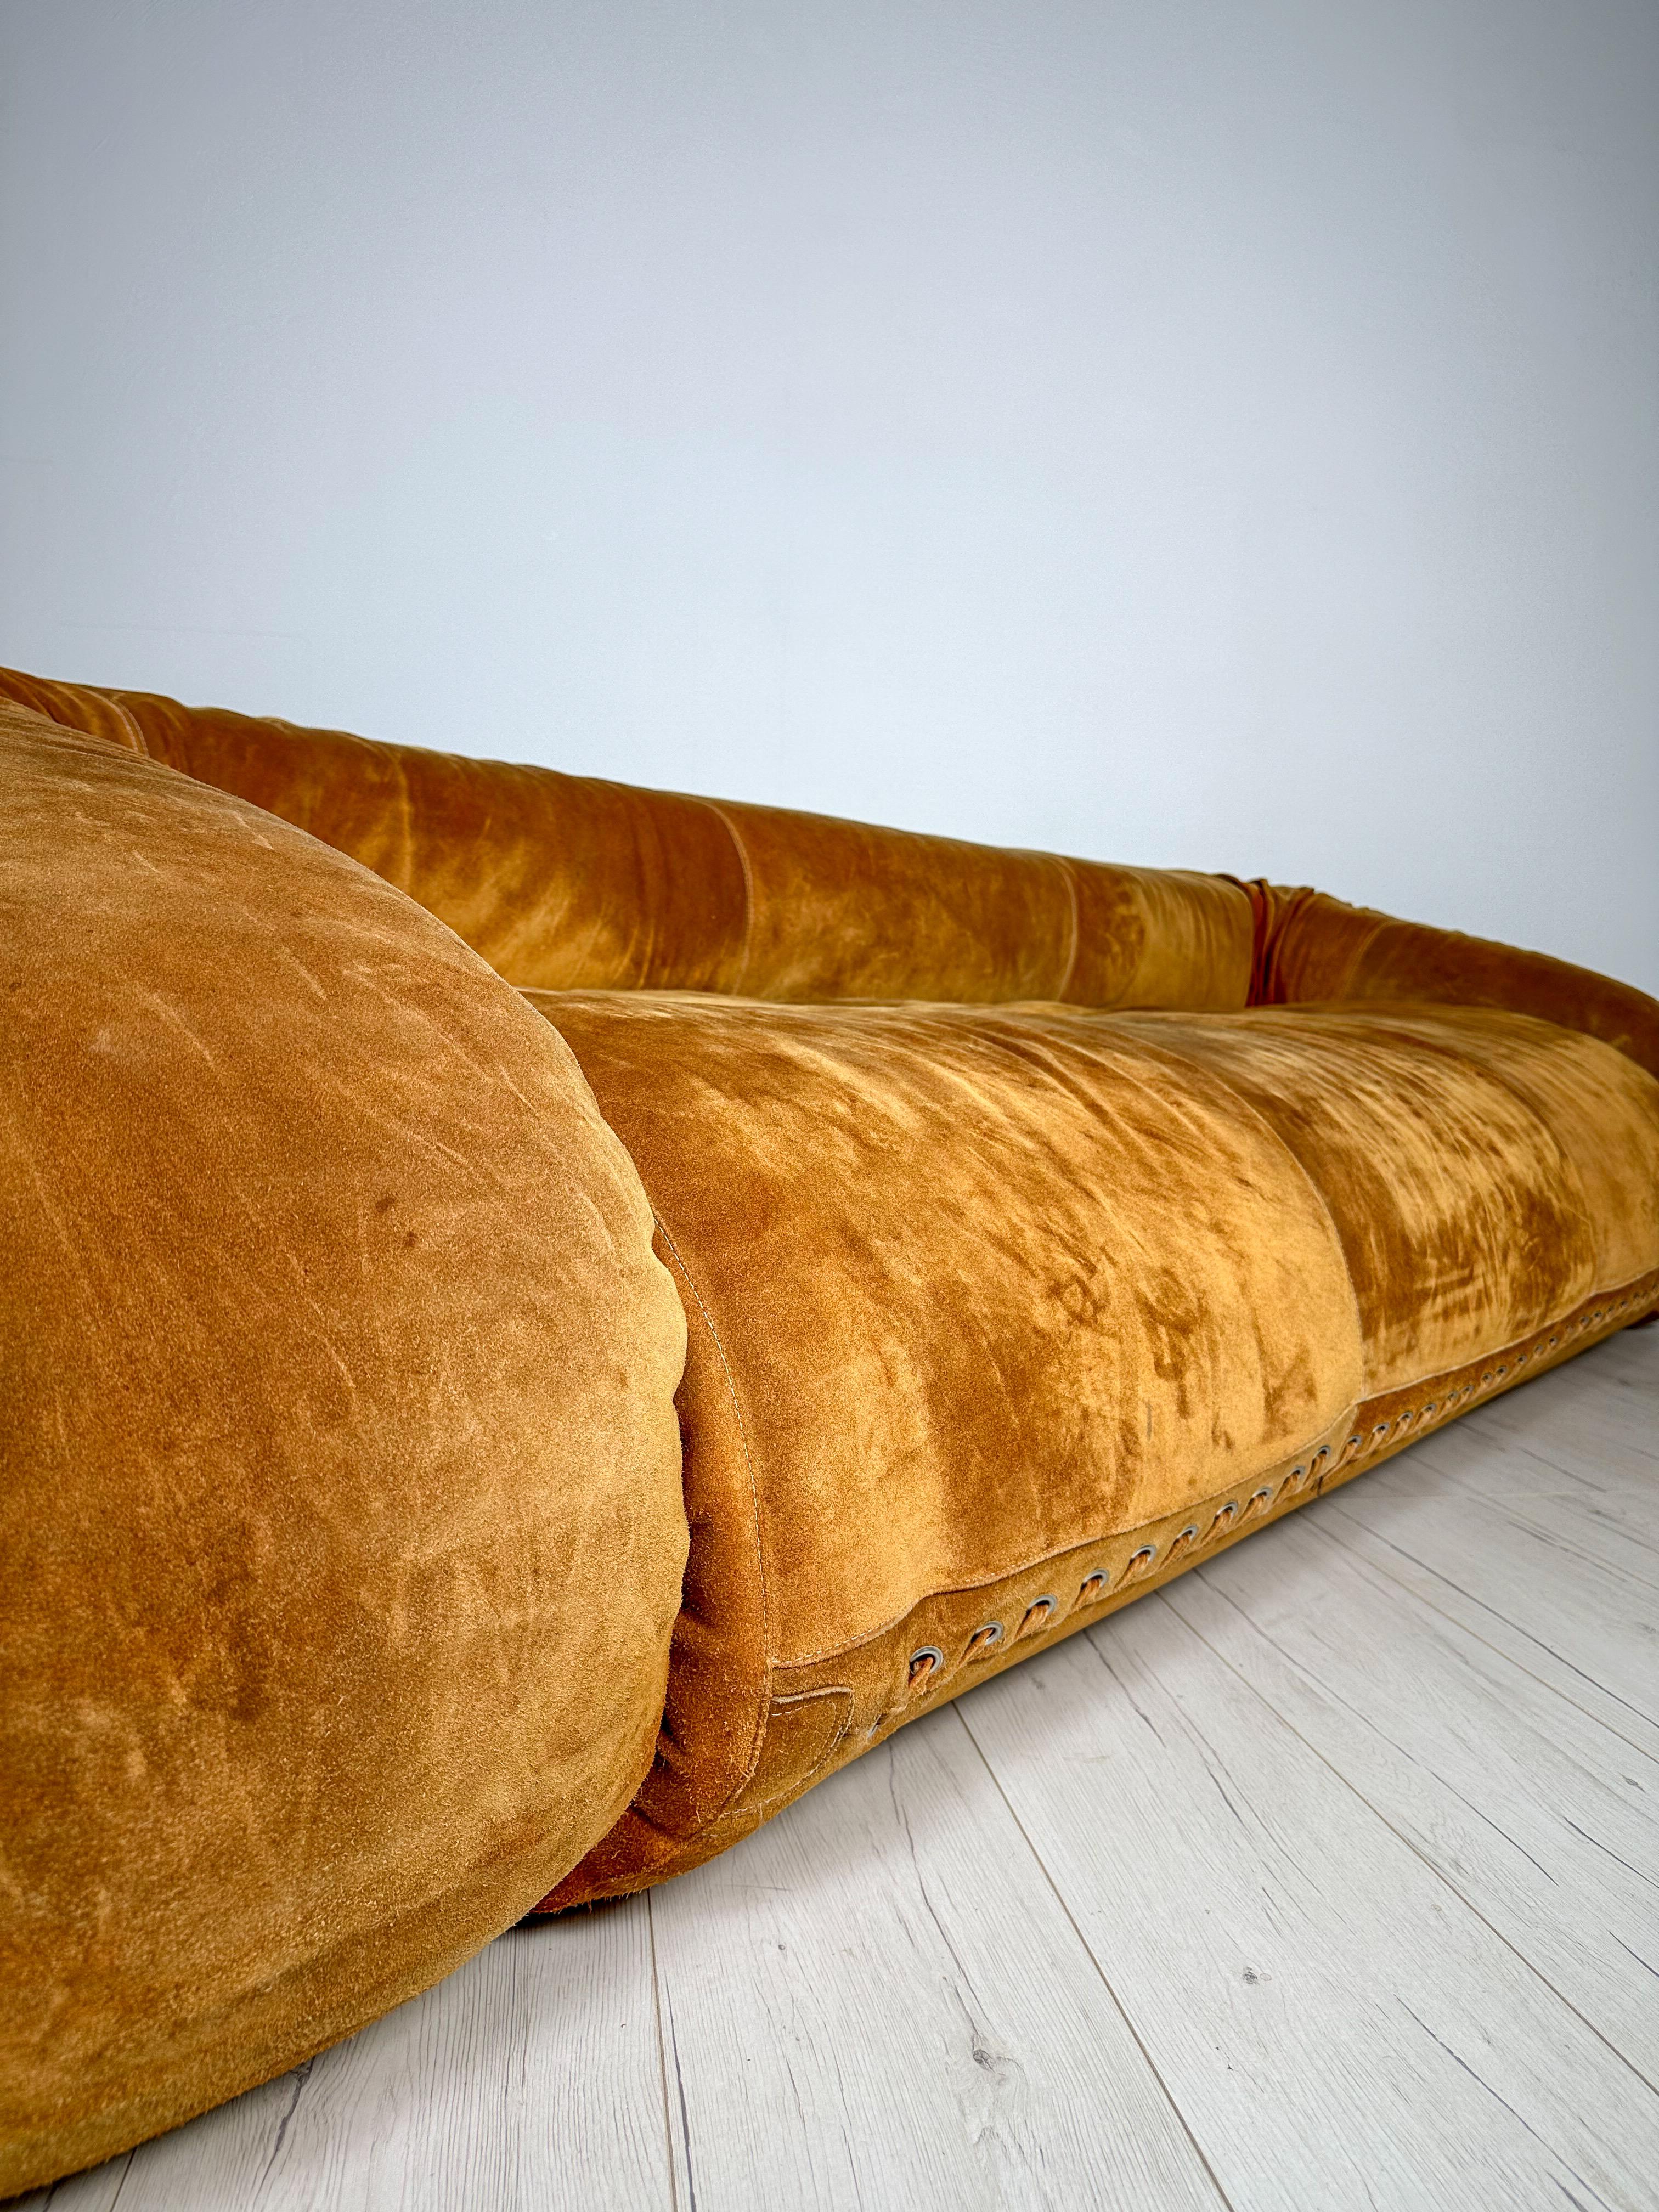 Vintage Suede 3-Seater Anfibio Sofa Bed by Alessandro Becchi for Giovannetti 70s For Sale 3